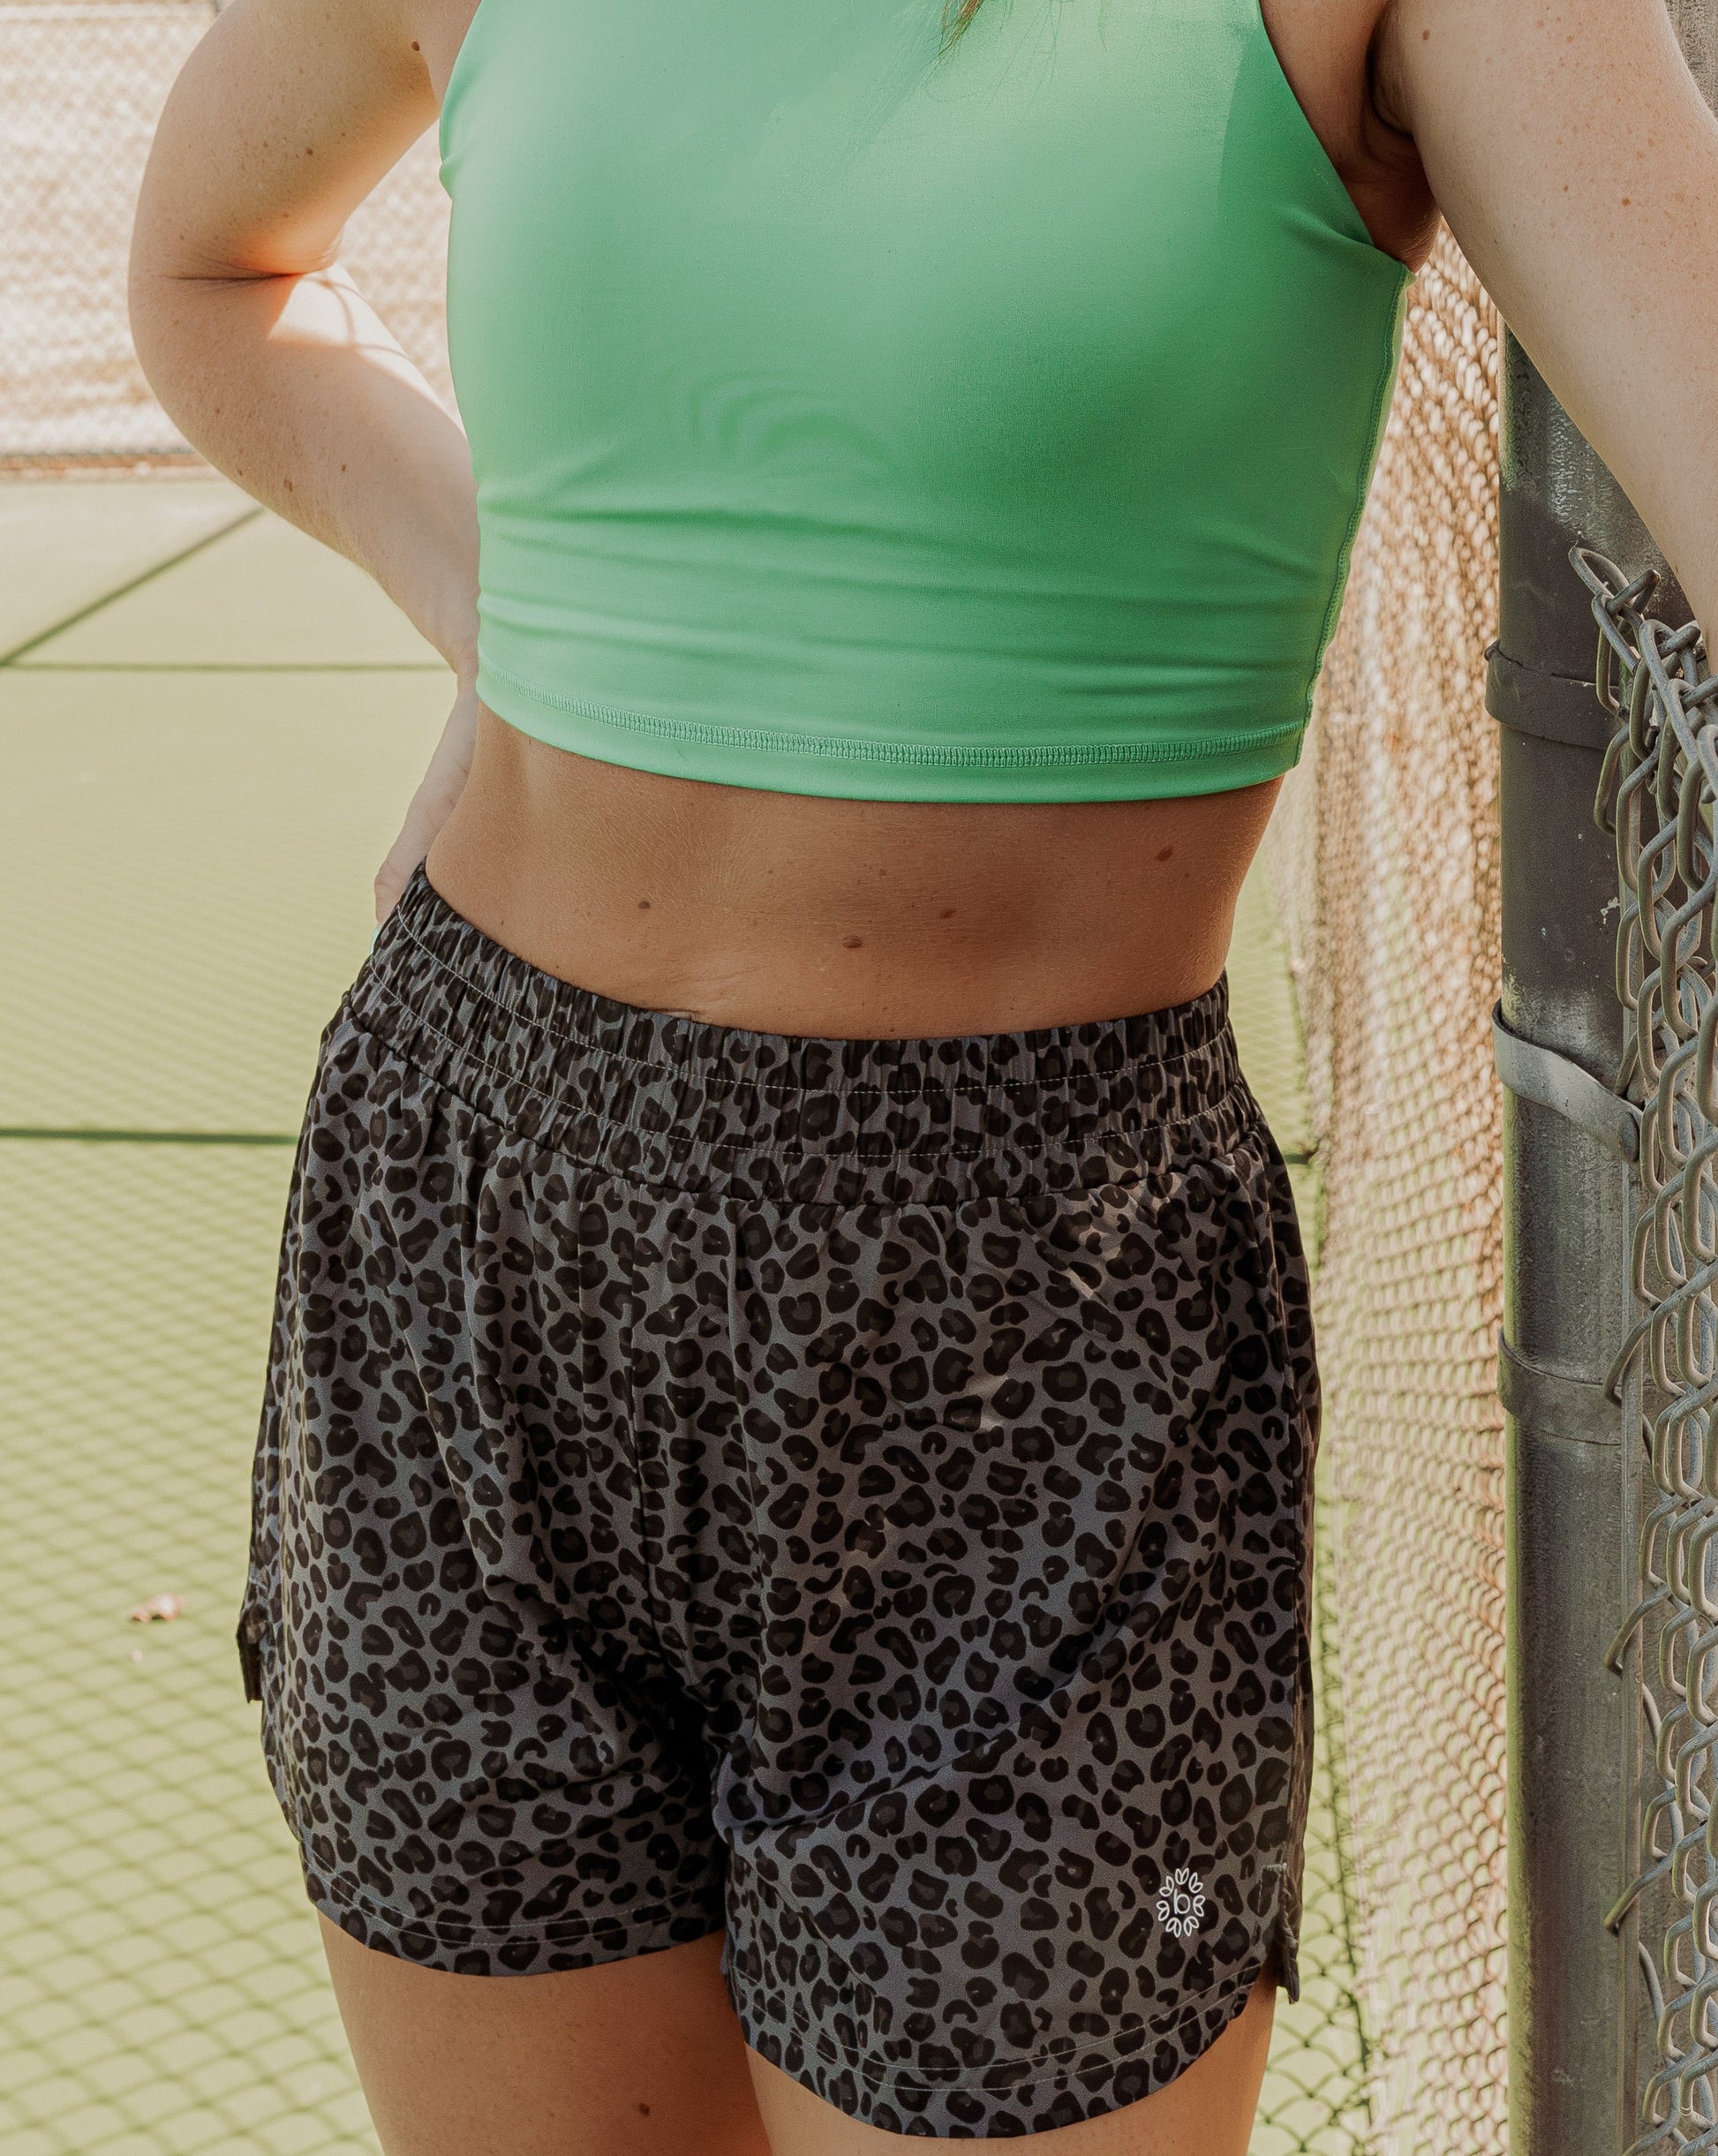 Blonde haired women standing on a tennis court next to the fence.  She is wearing a bright green long lined tank top and high waisted grey leopard running shorts.  This photo does not include her face but the middle half of her body.